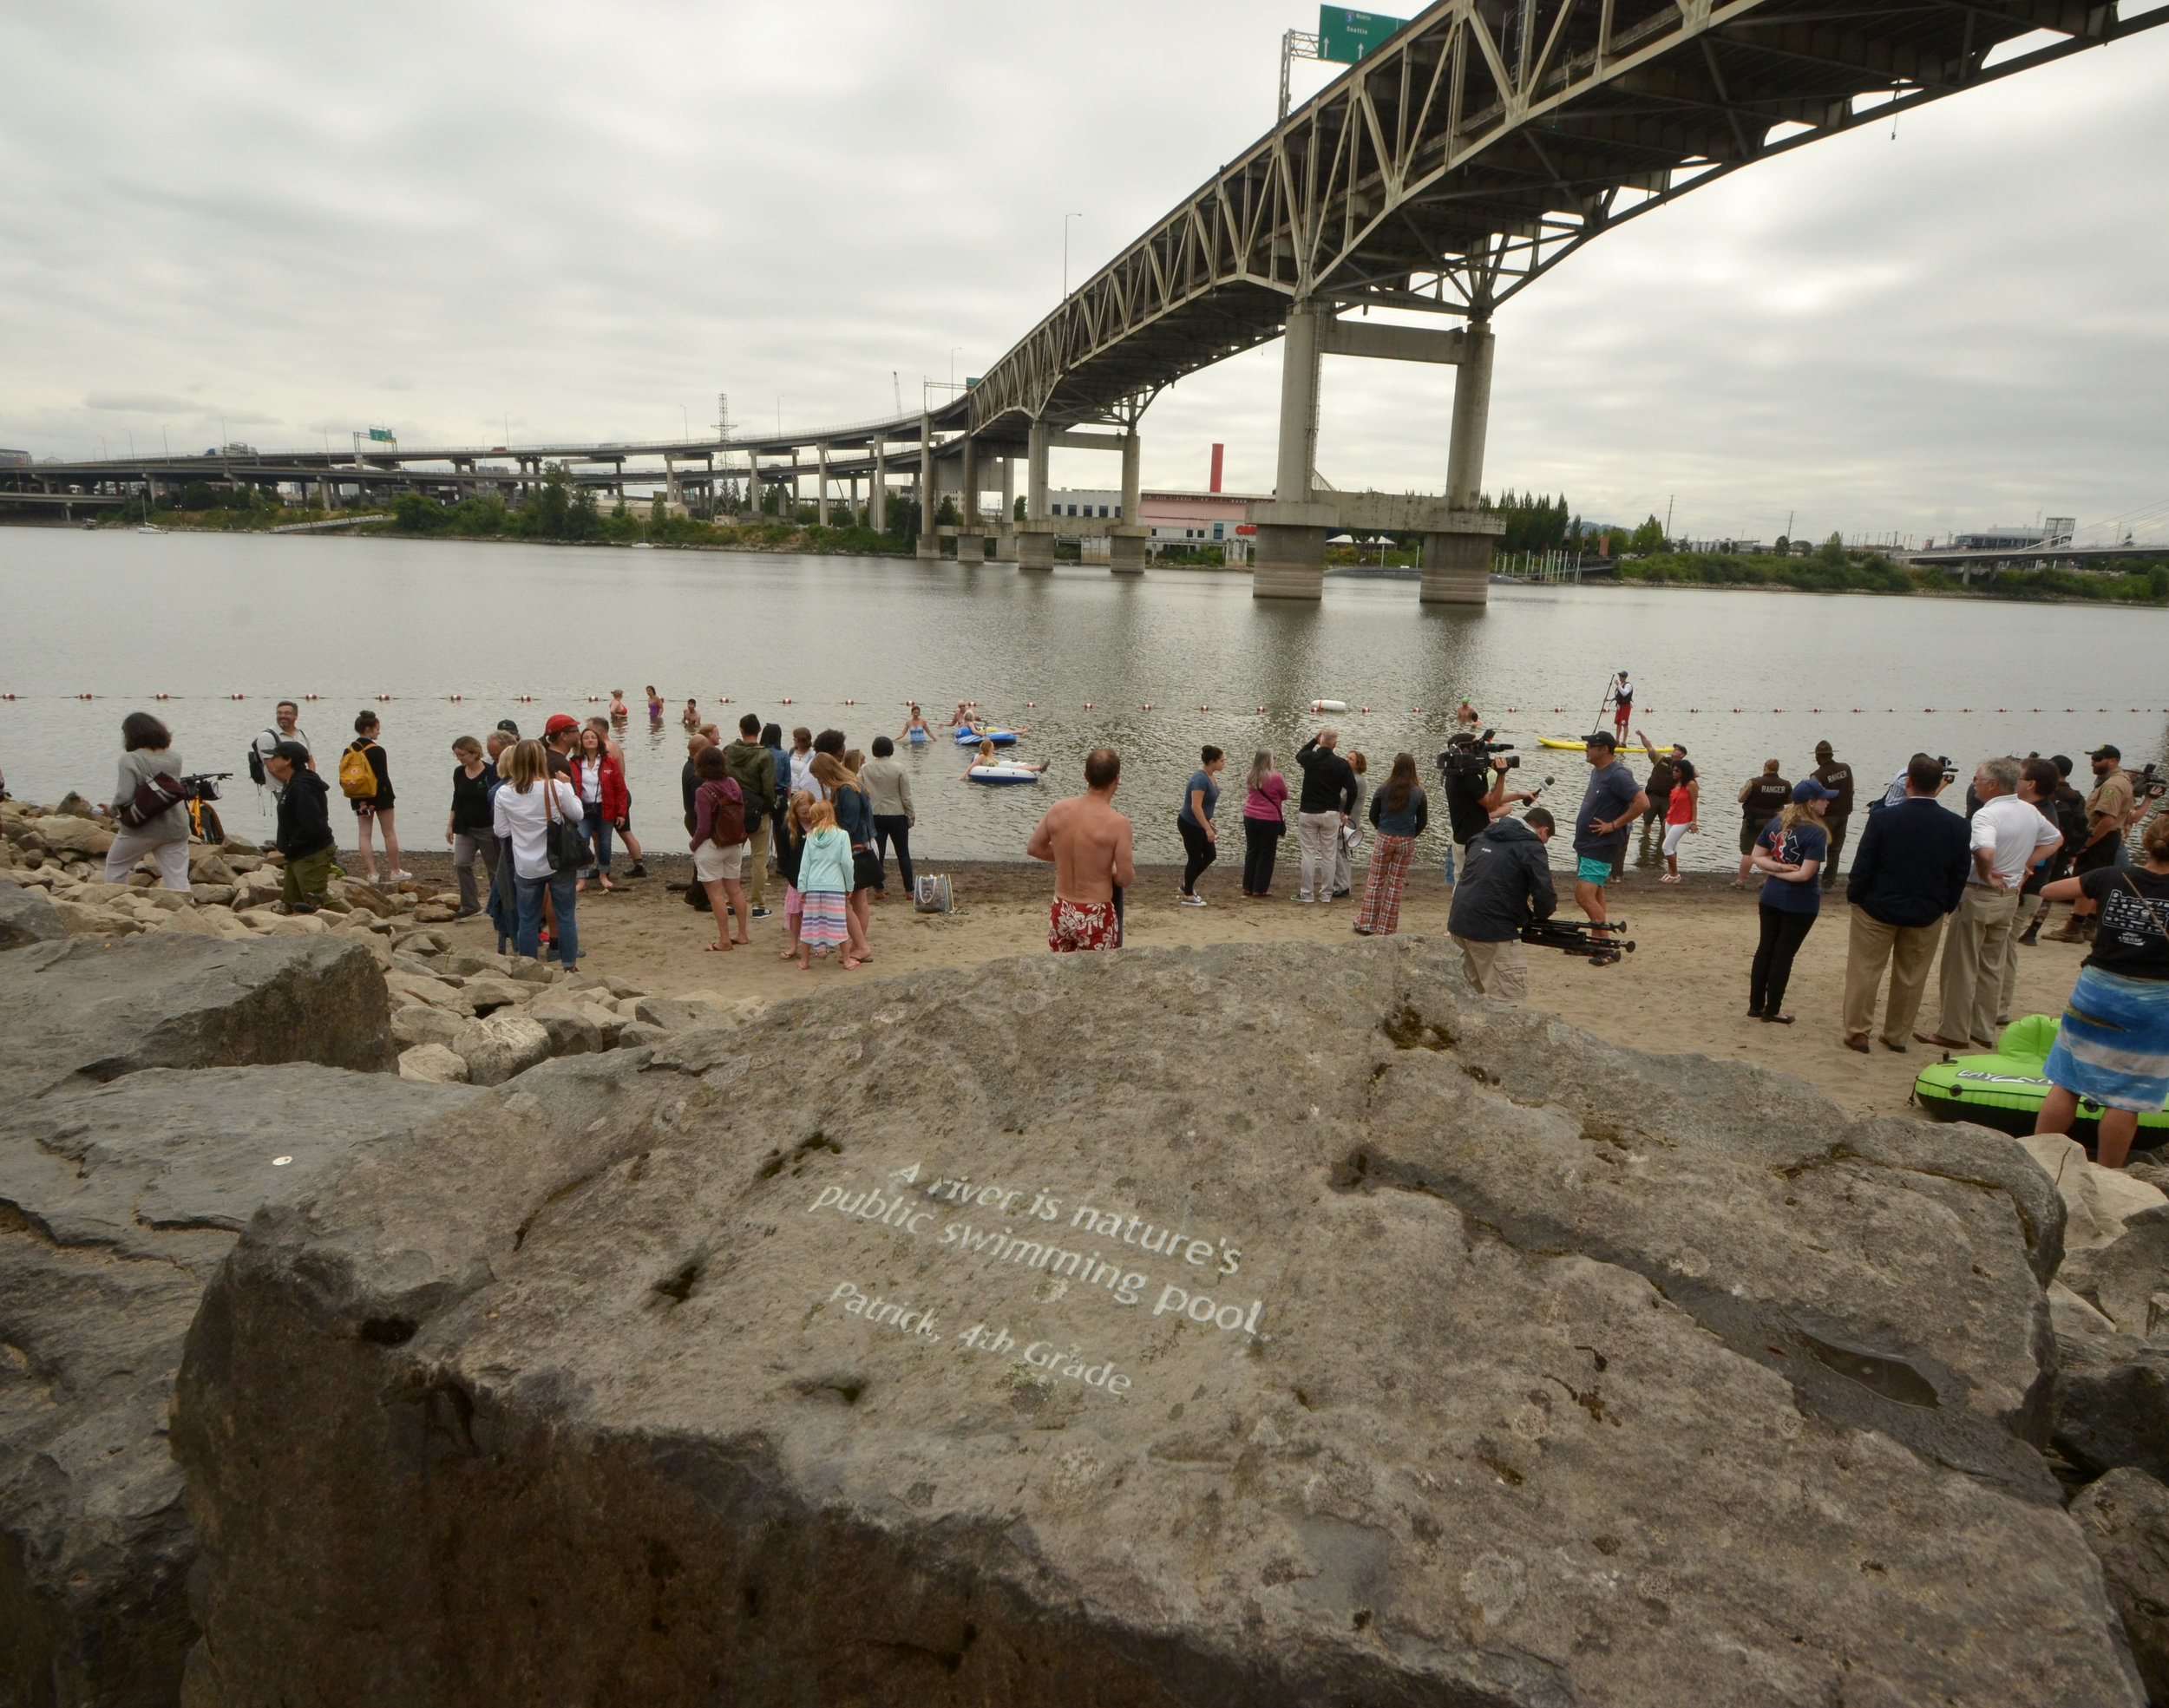  One of the Honoring Our Rivers student poems engraved in stone at Poet's Beach by a fourth grader named Patrick.&nbsp; 